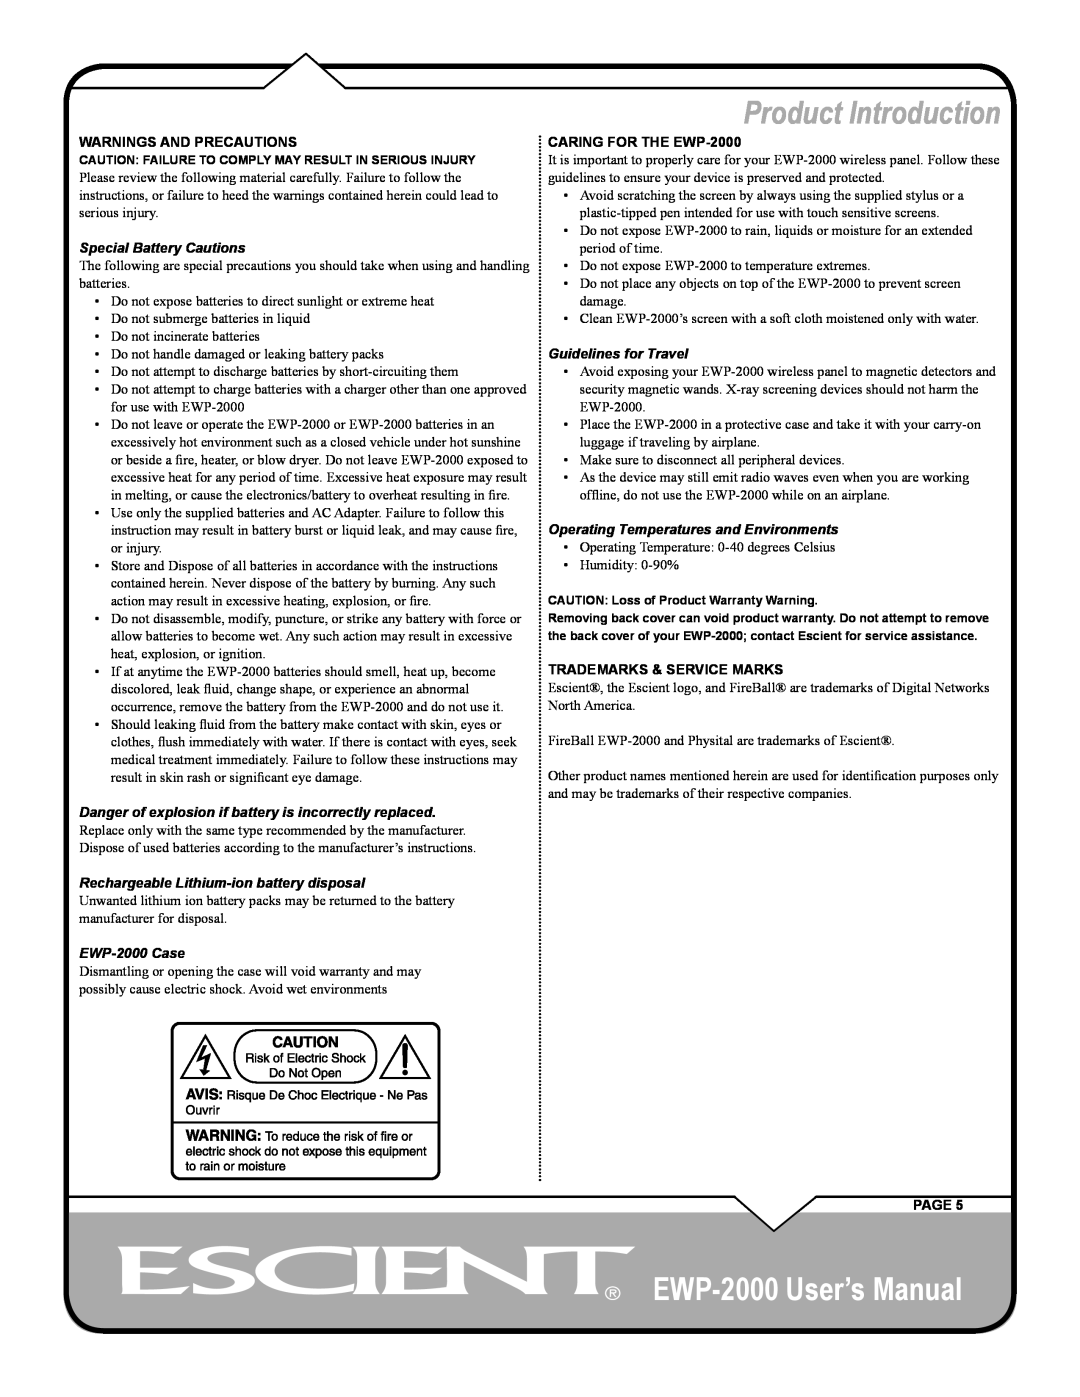 Escient Product Introduction, EWP-2000 User’s Manual, Warnings And Precautions, CARING FOR THE EWP-2000, Page 